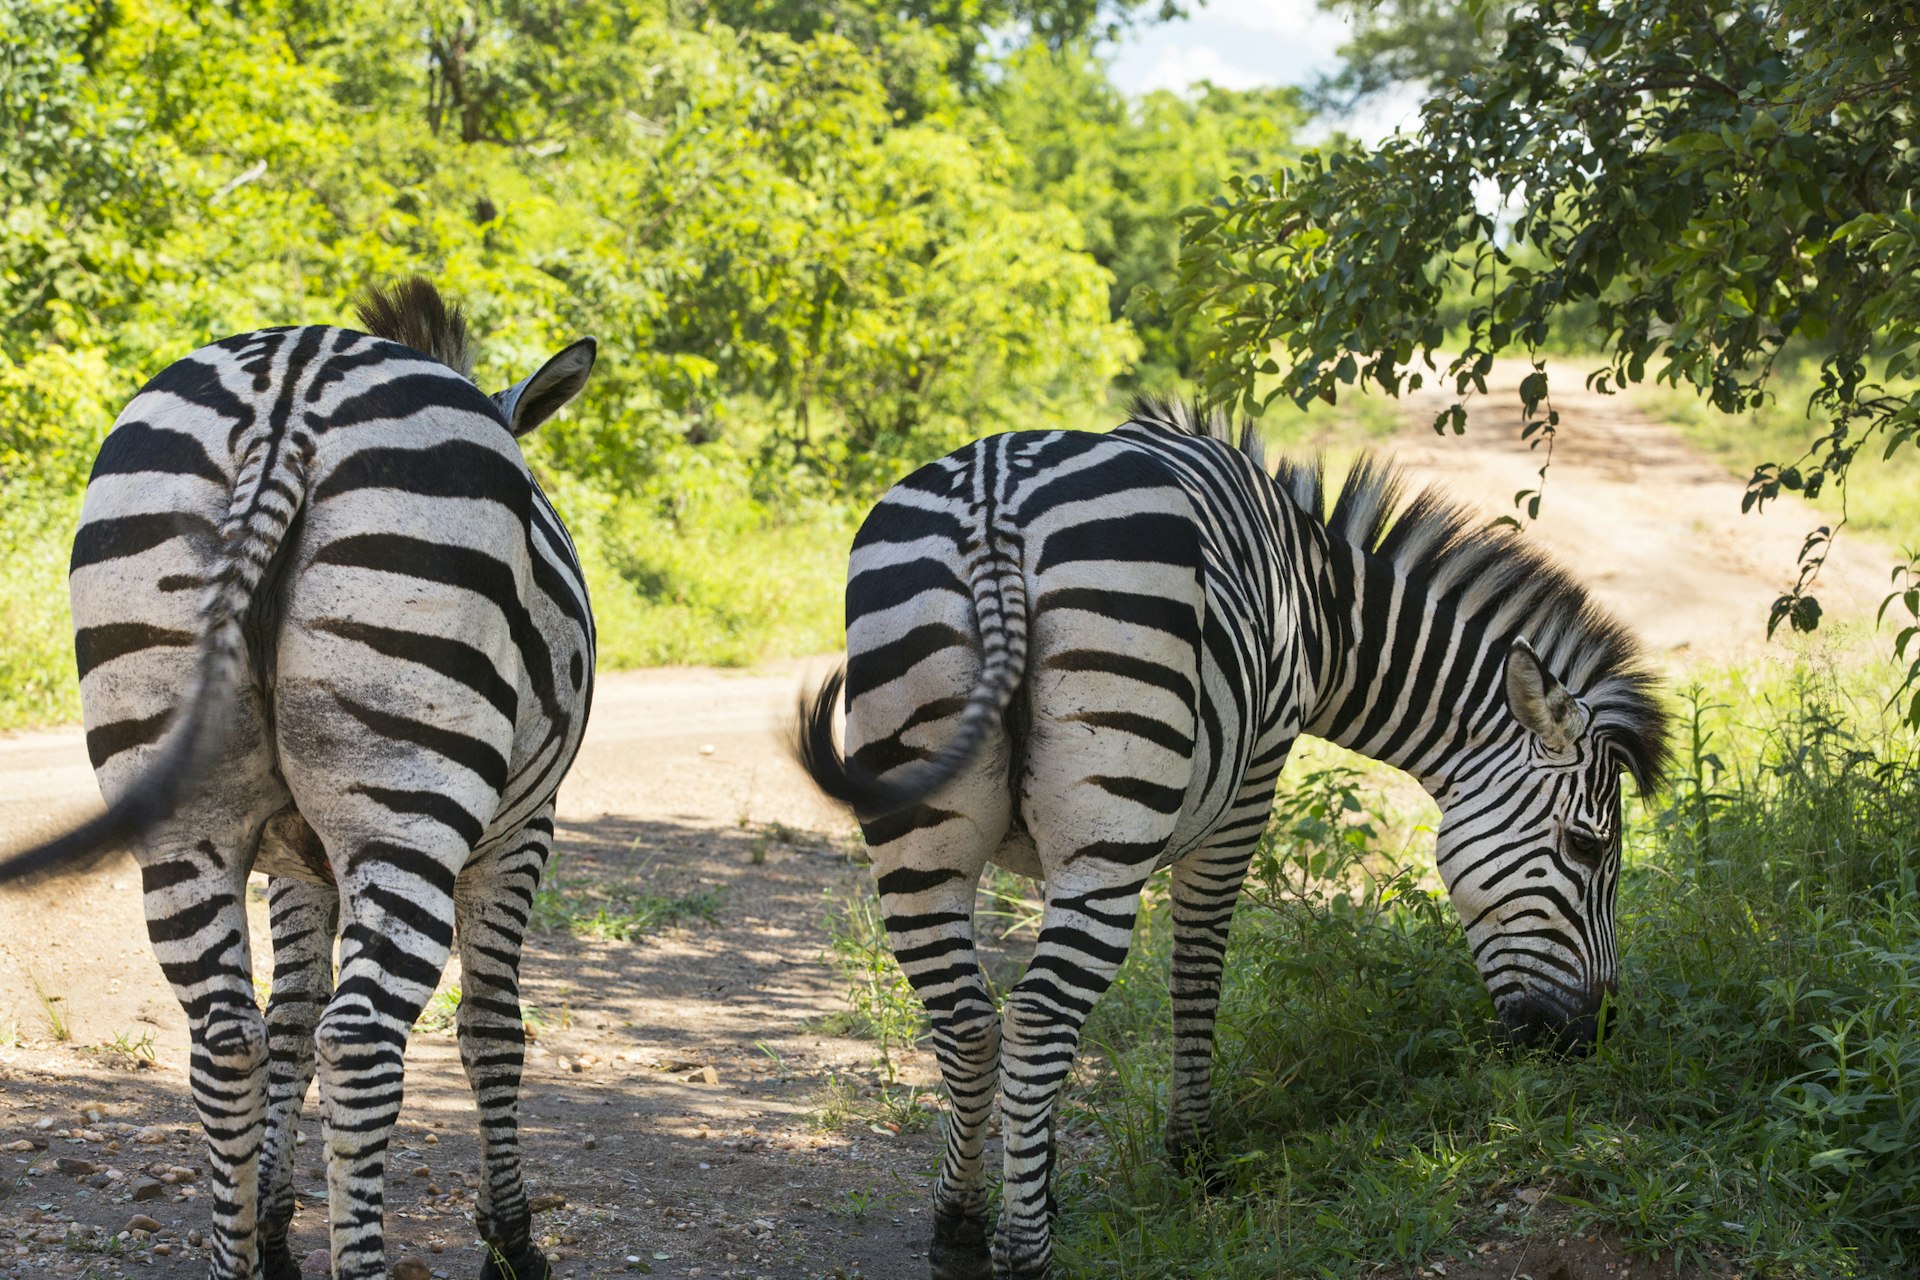 Two large zebras graze by the side of a dirt track road in a wildlife reserve